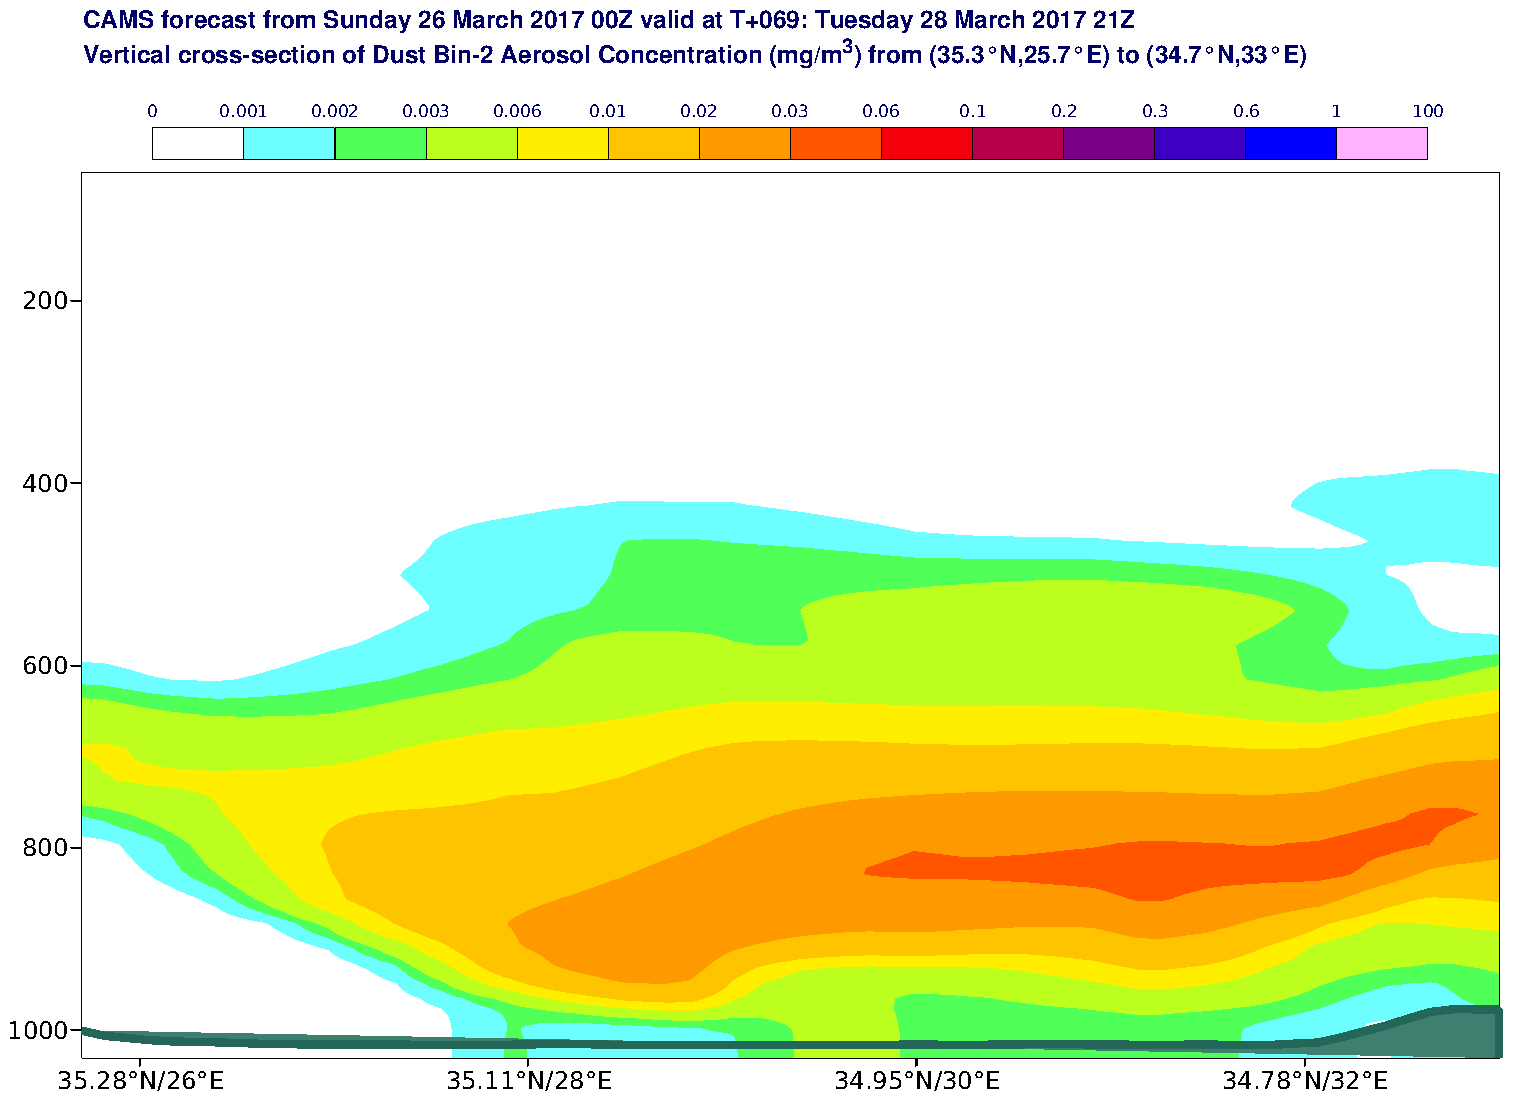 Vertical cross-section of Dust Bin-2 Aerosol Concentration (mg/m3) valid at T69 - 2017-03-28 21:00